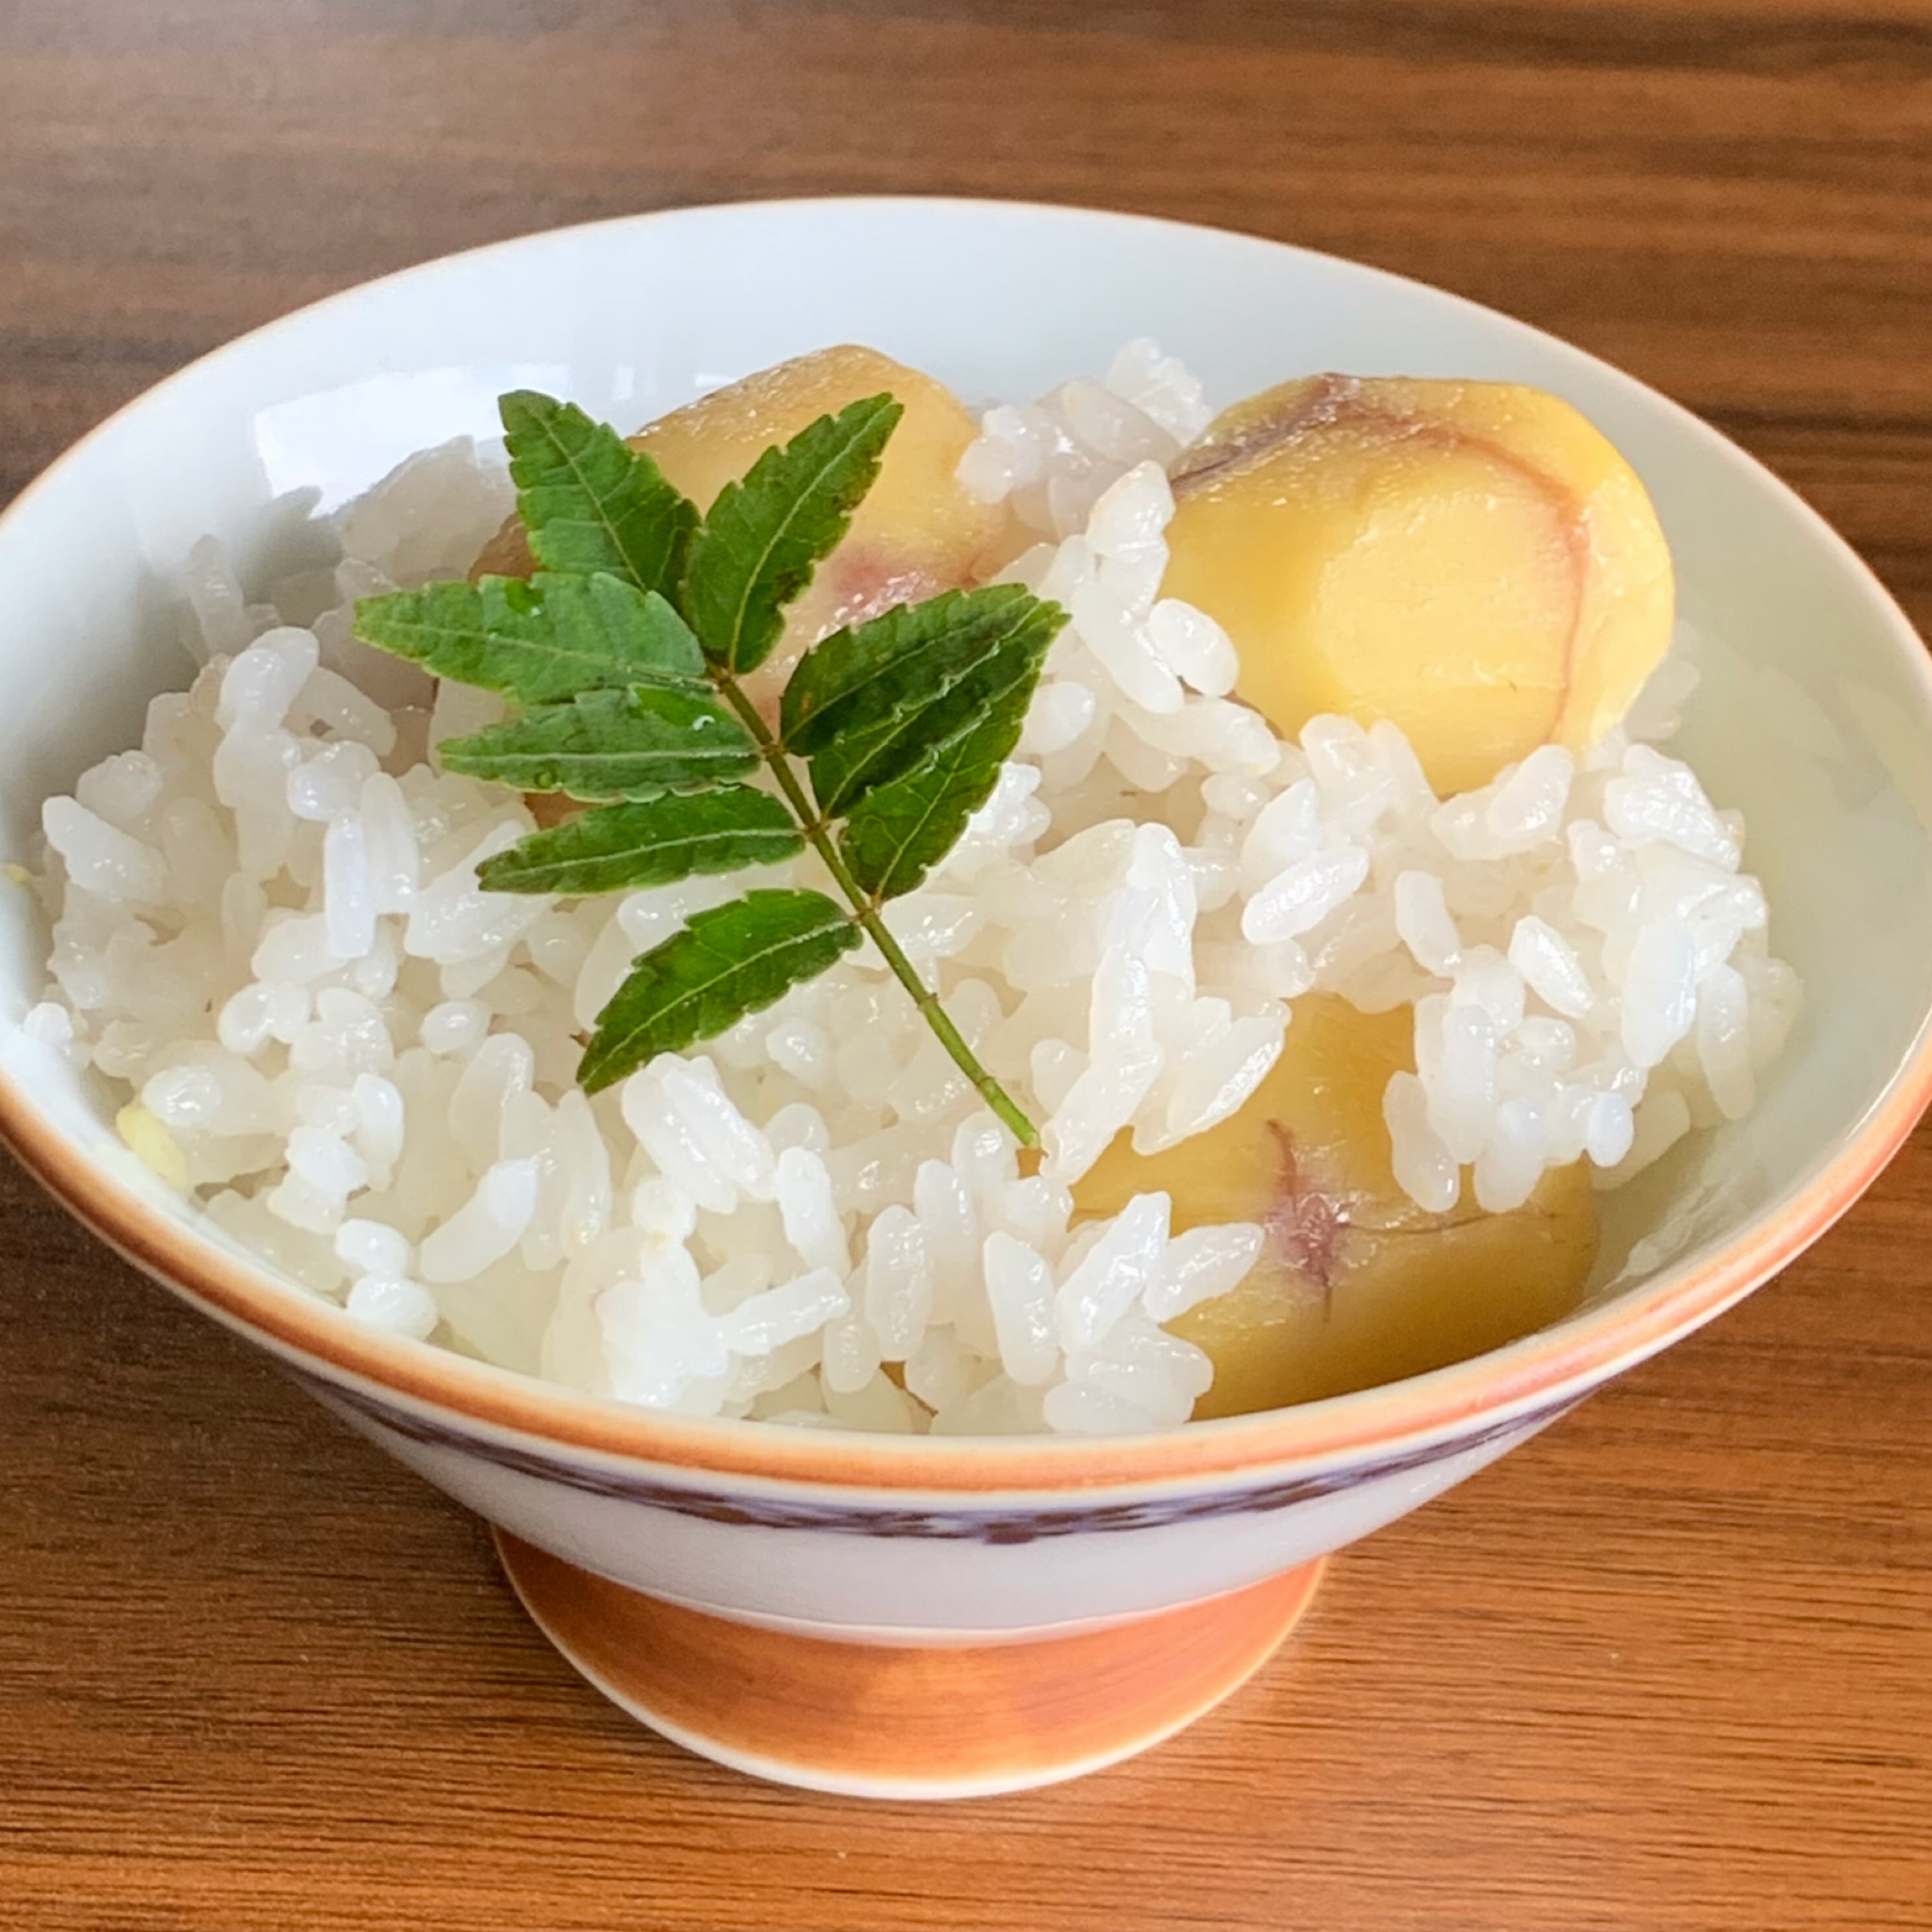 This chestnut rice is made by combining regular rice and glutinous rice.